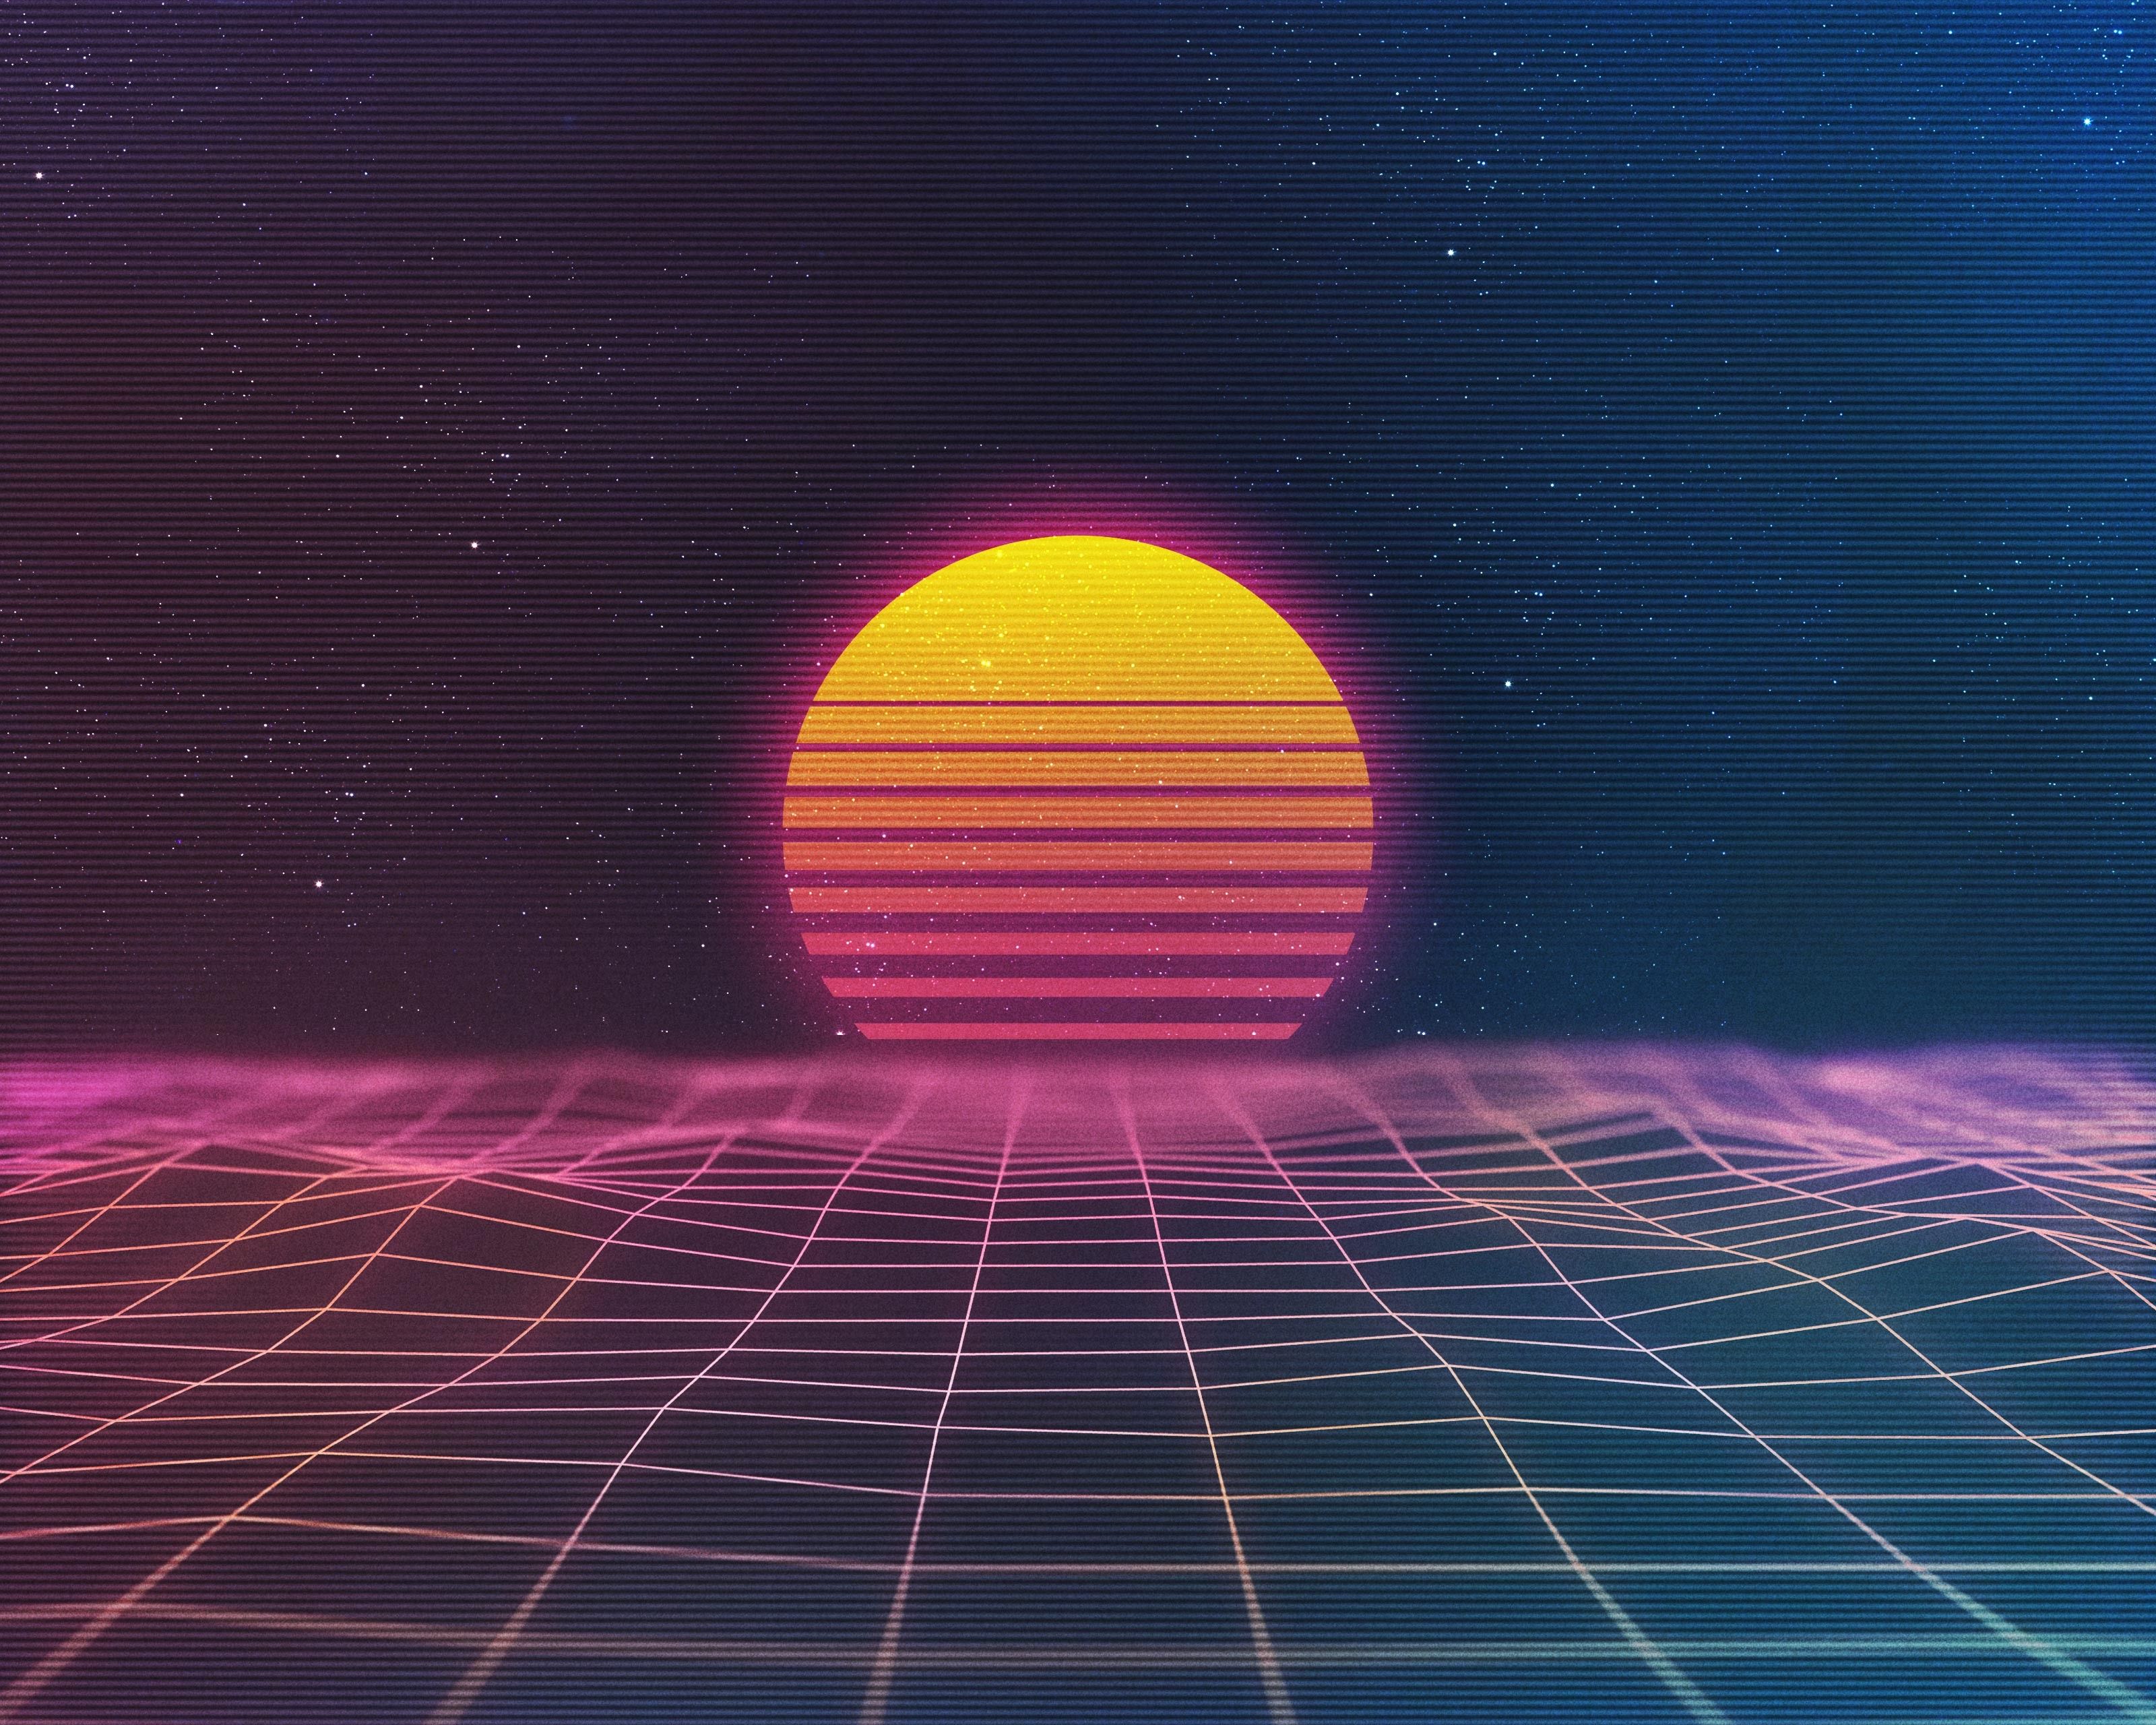 A sunset over a grid of interconnected lines - Synthwave